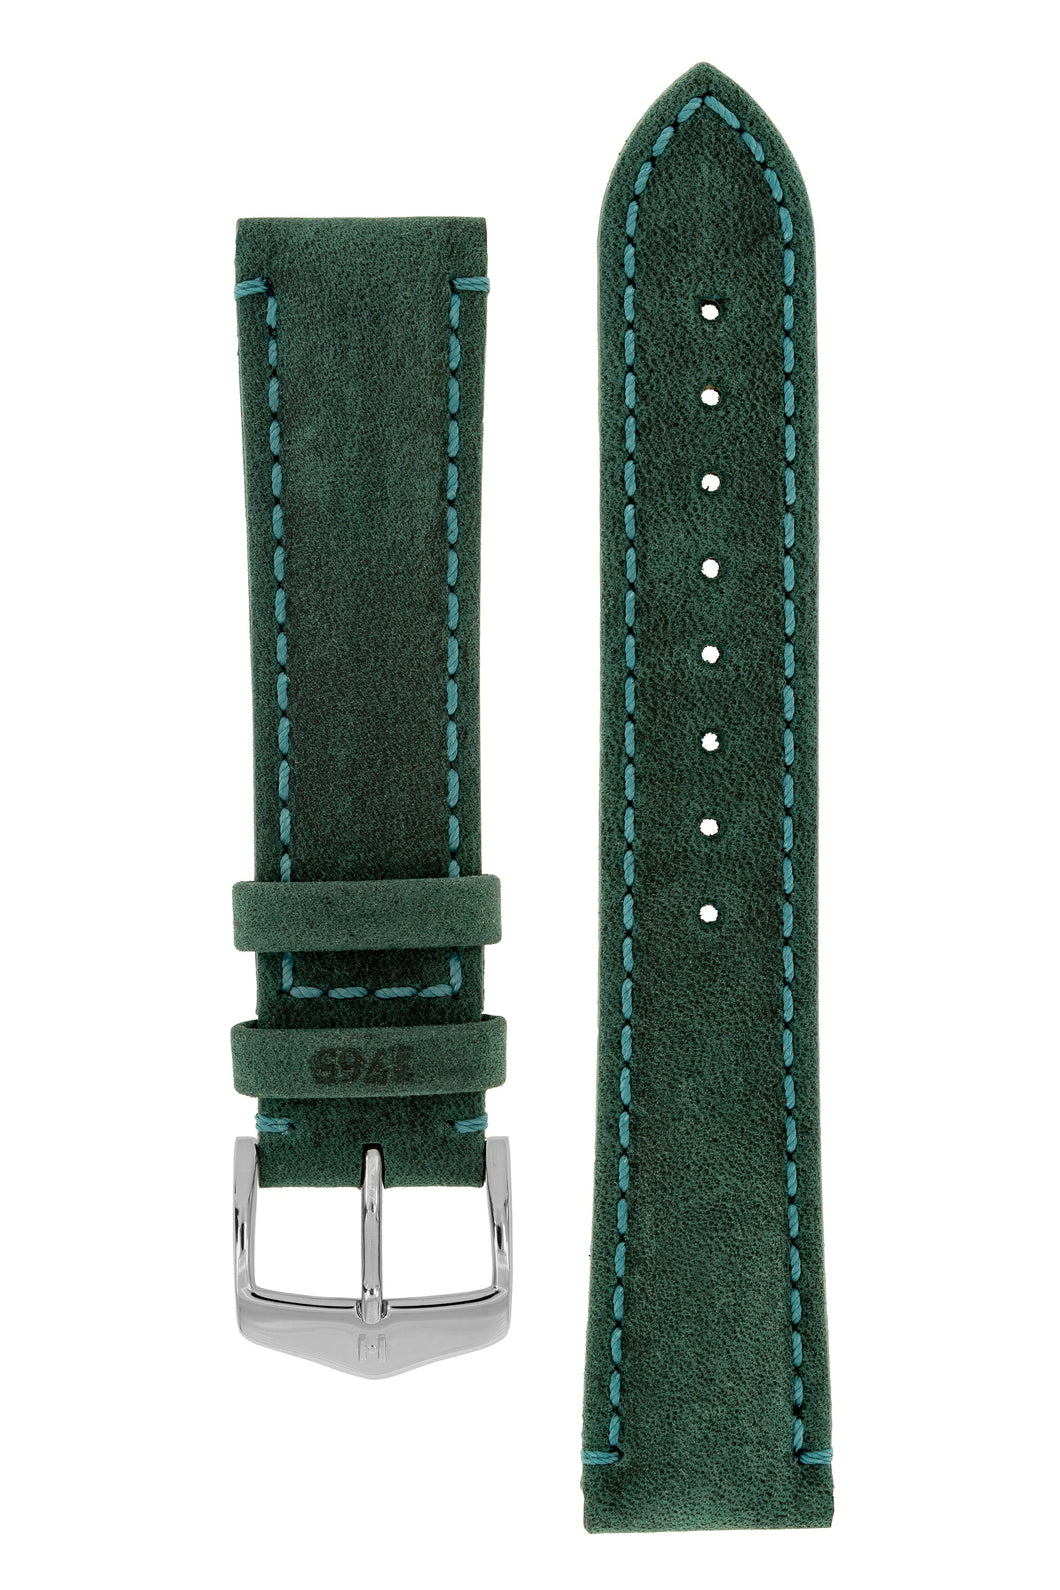 Hirsch Heritage Natural Calfskin Leather Watch Strap in Teal (with Polished Silver Steel H-Classic Buckle)